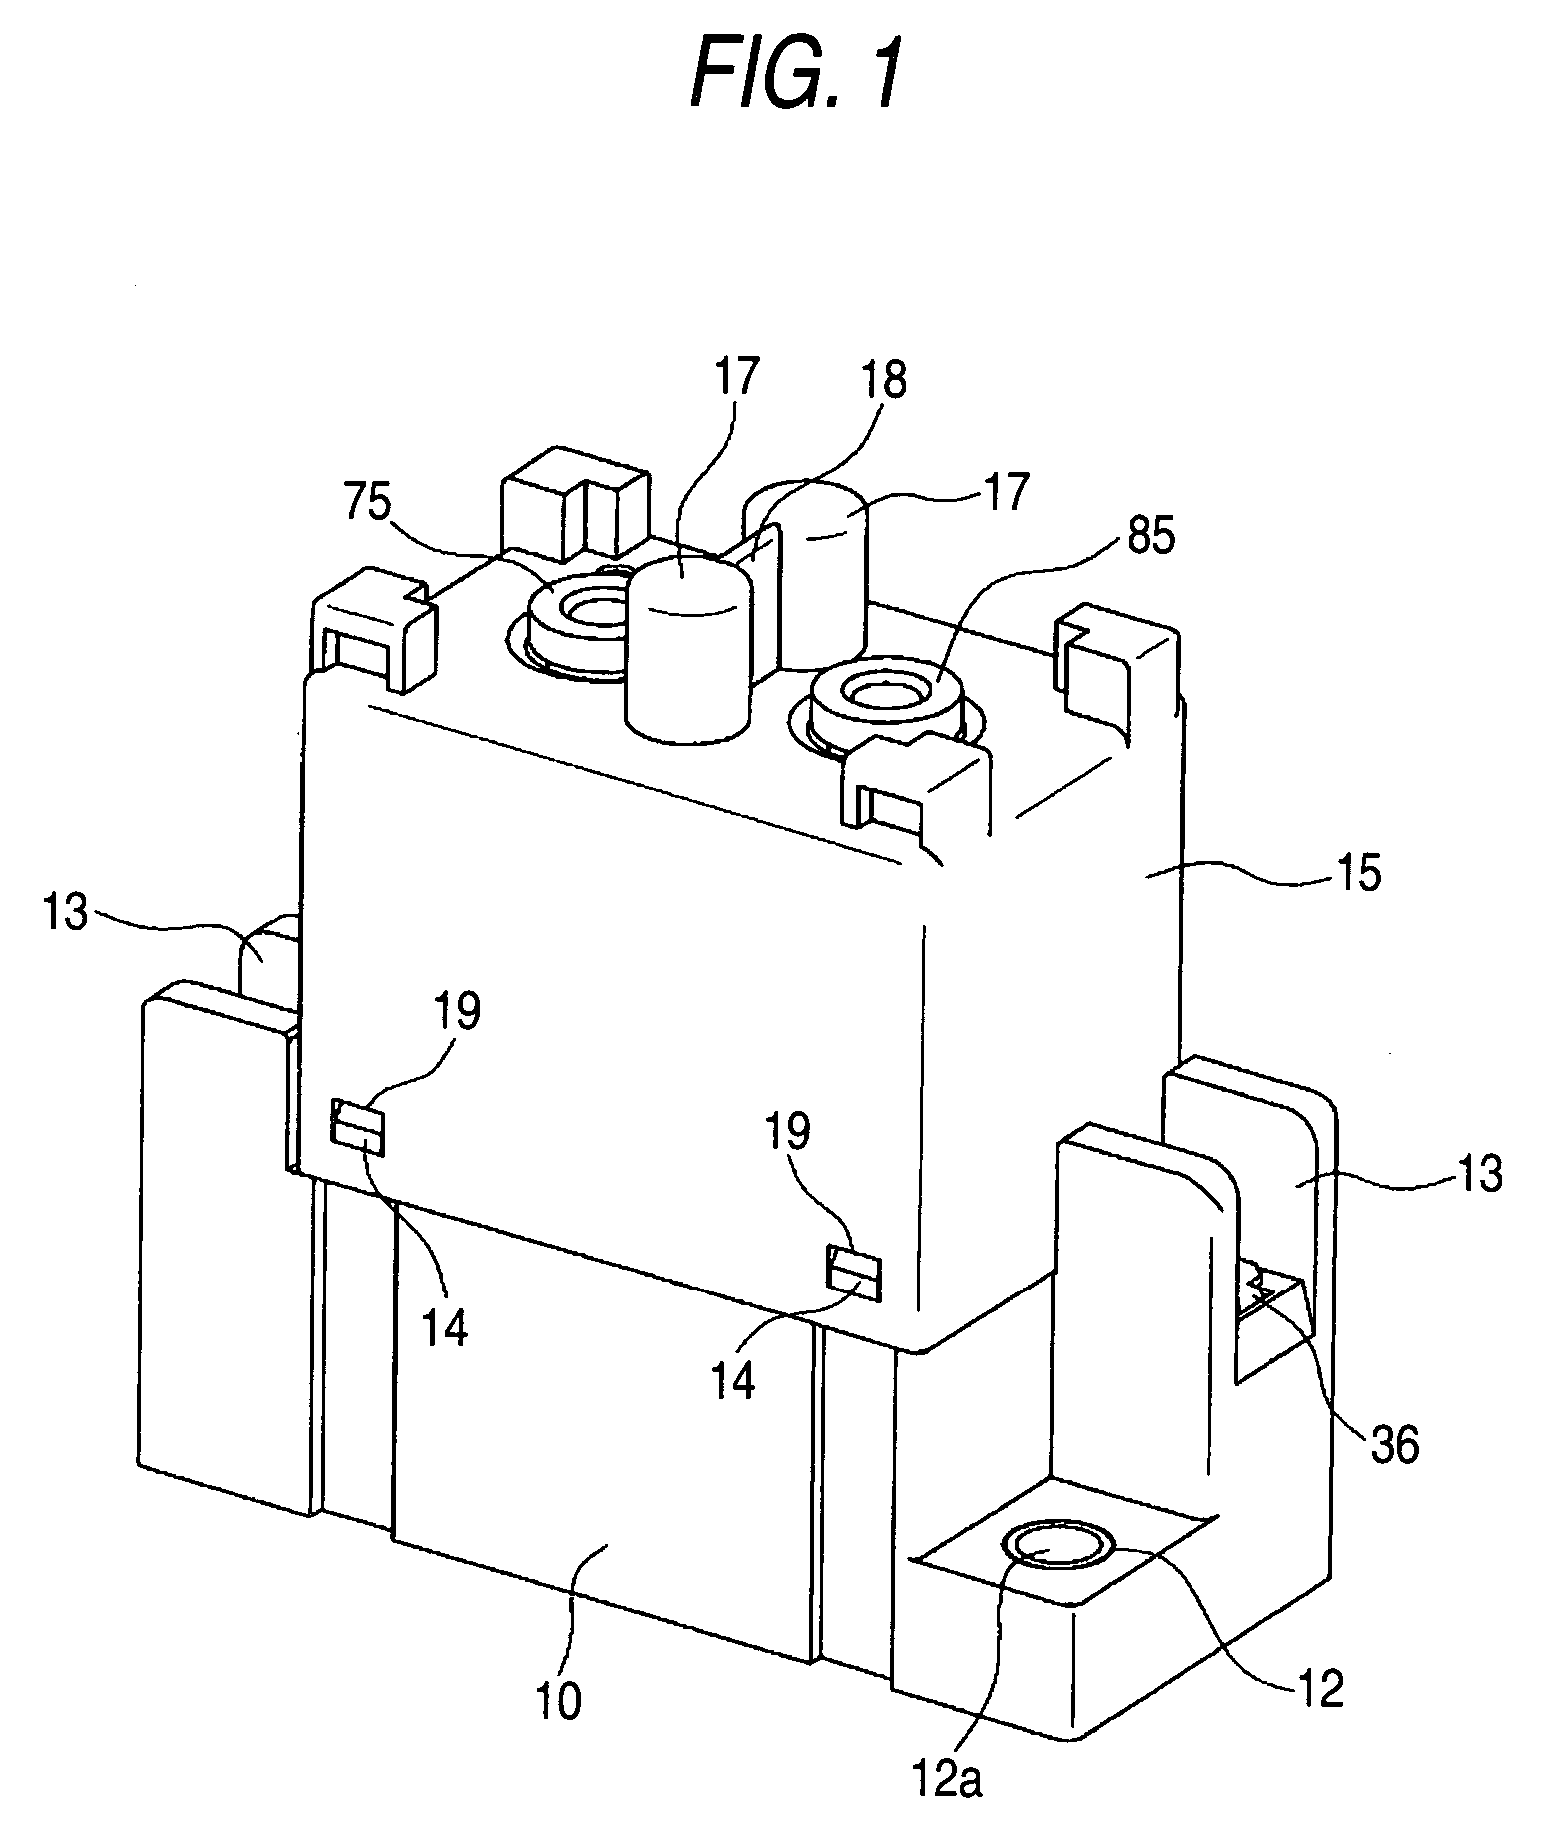 Supporting structure of fixed contact terminals